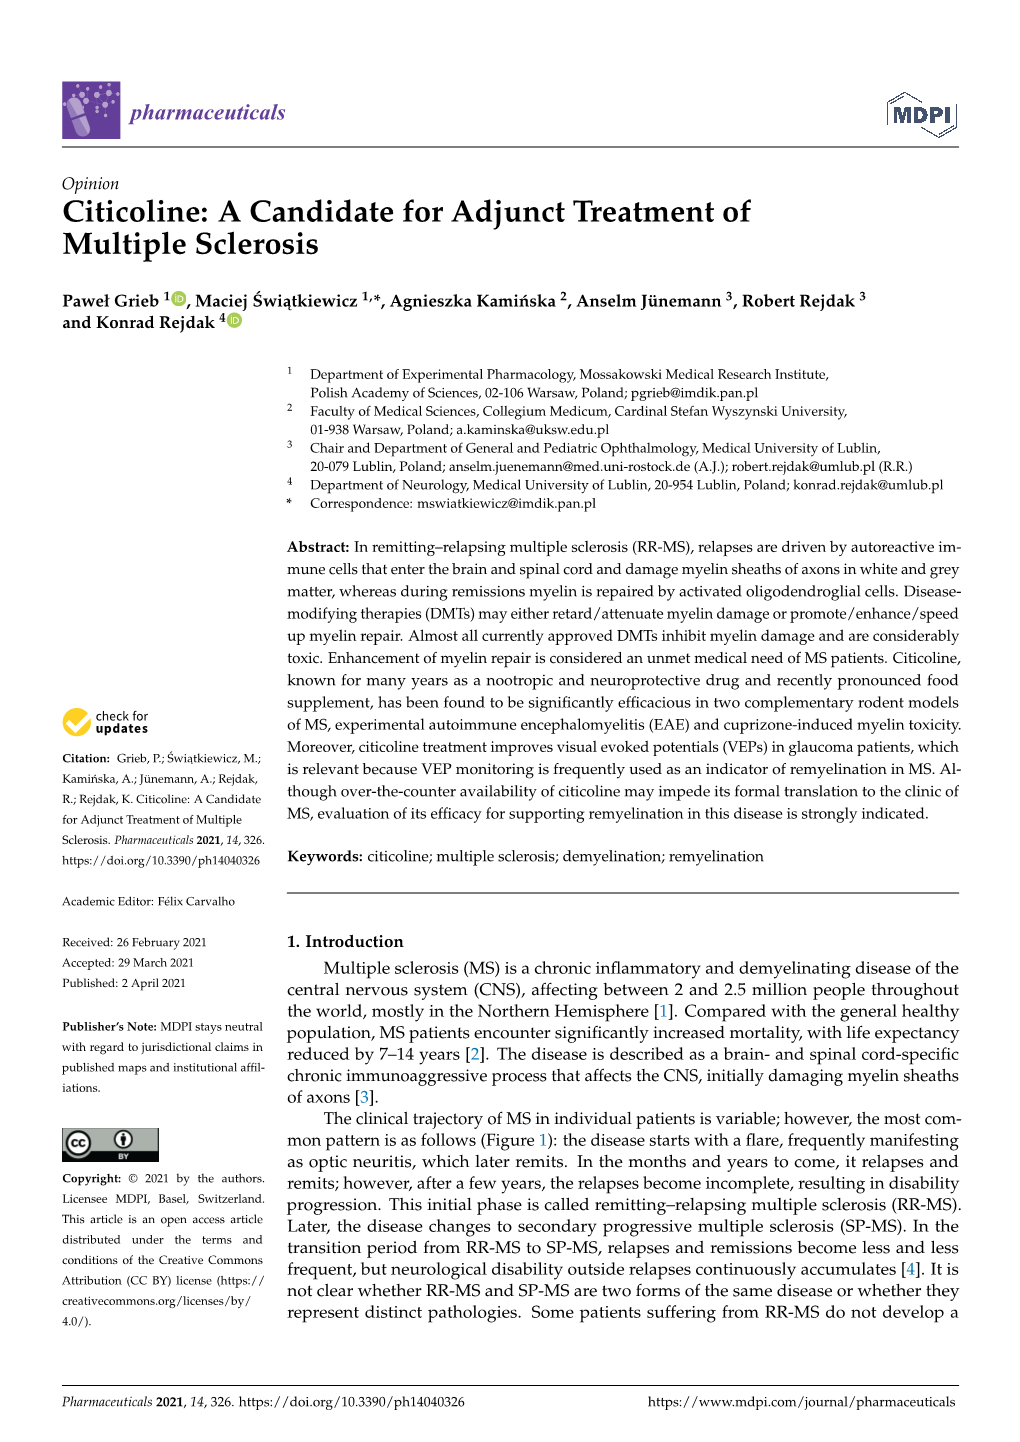 Citicoline: a Candidate for Adjunct Treatment of Multiple Sclerosis